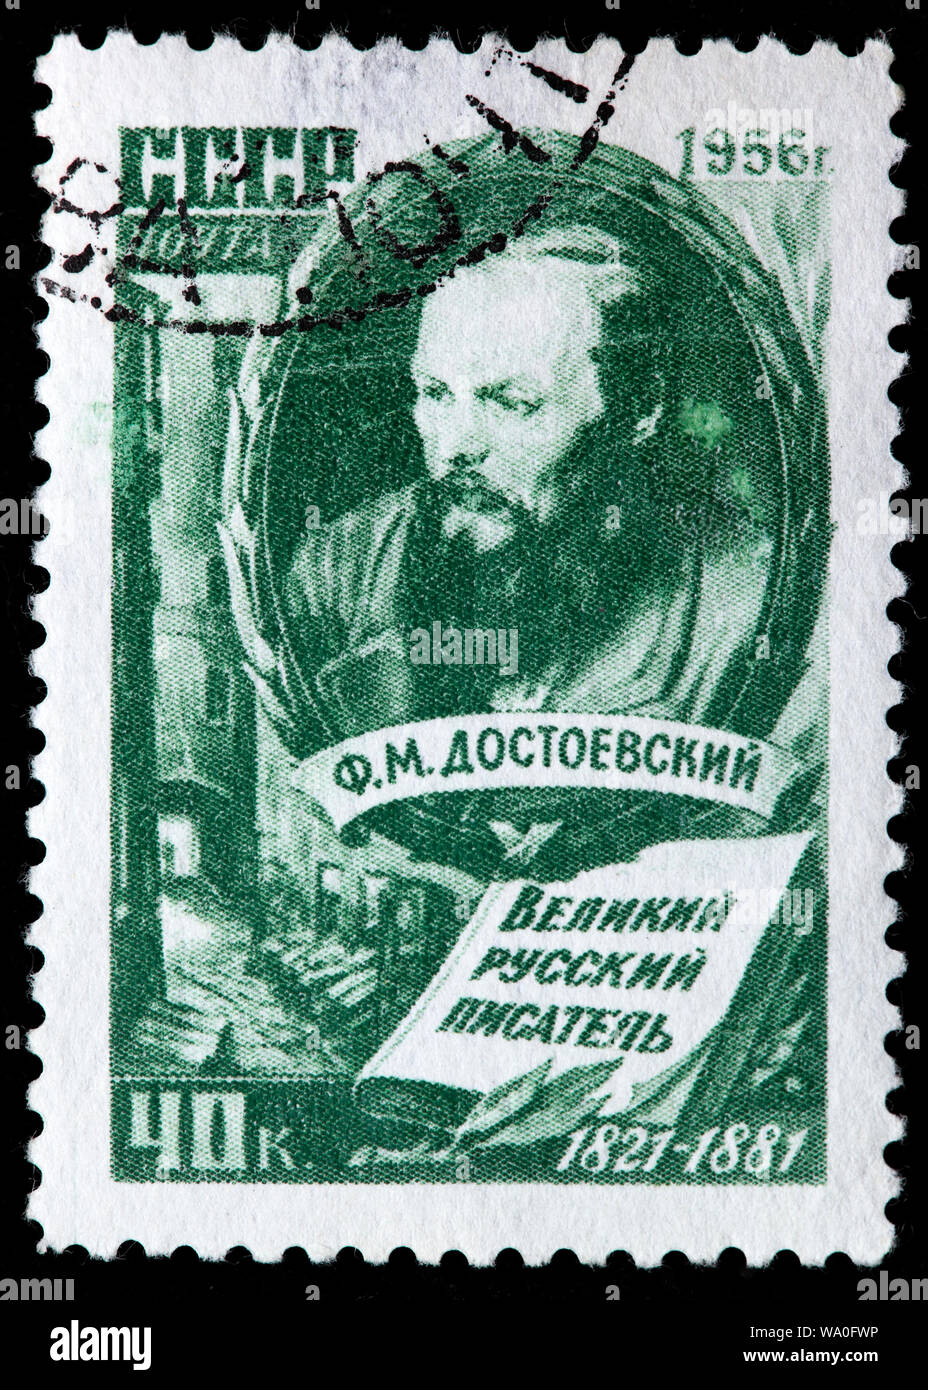 Fyodor Dostoevsky (1821-1881), Russian writer, postage stamp, Russia, USSR, 1956 Stock Photo